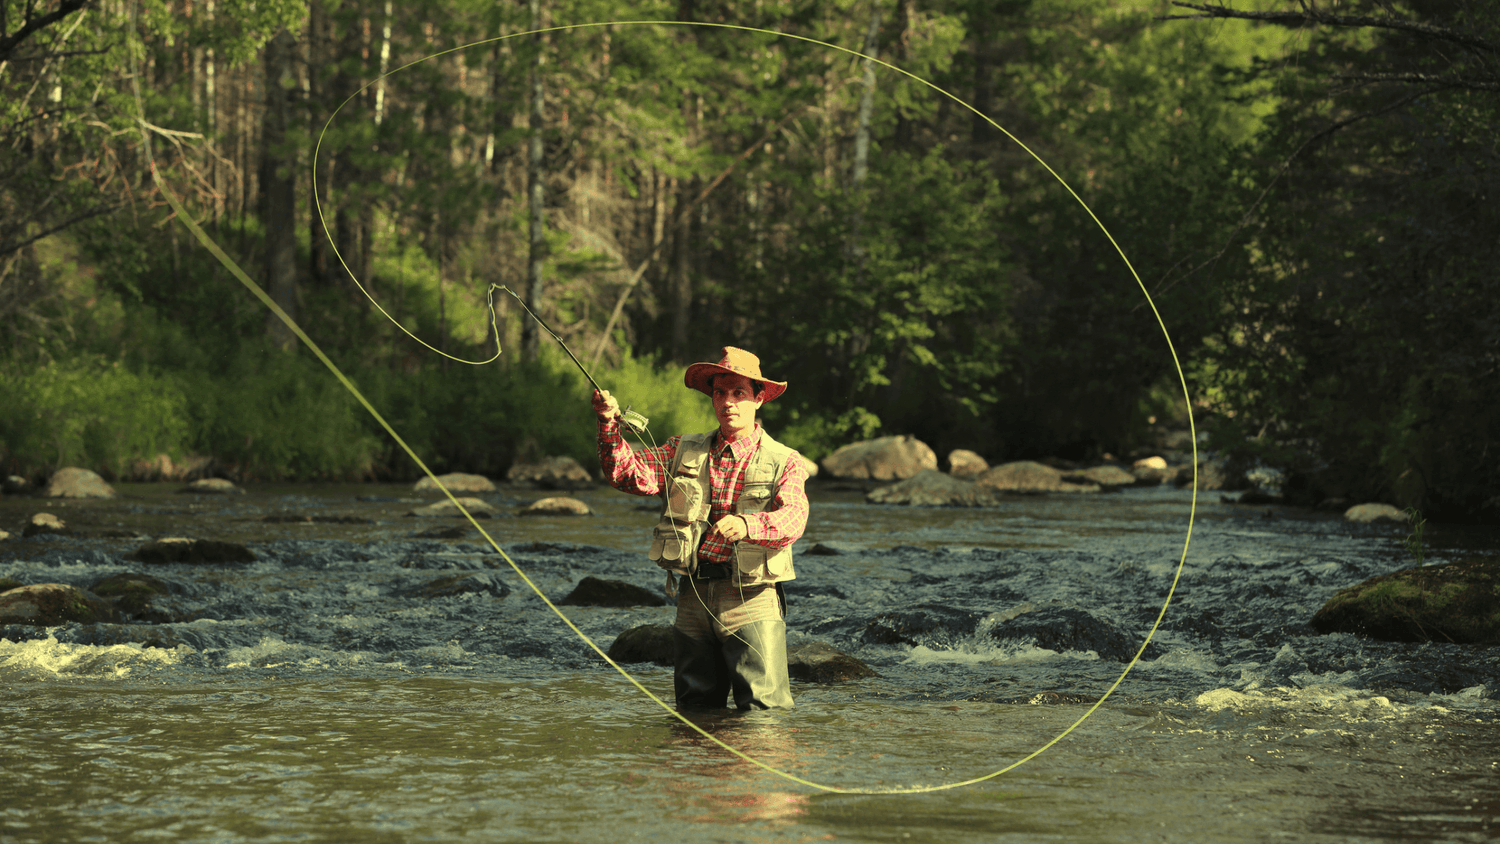 Fly Fishing in the Blue Ridge Mountains: A Serene Adventure